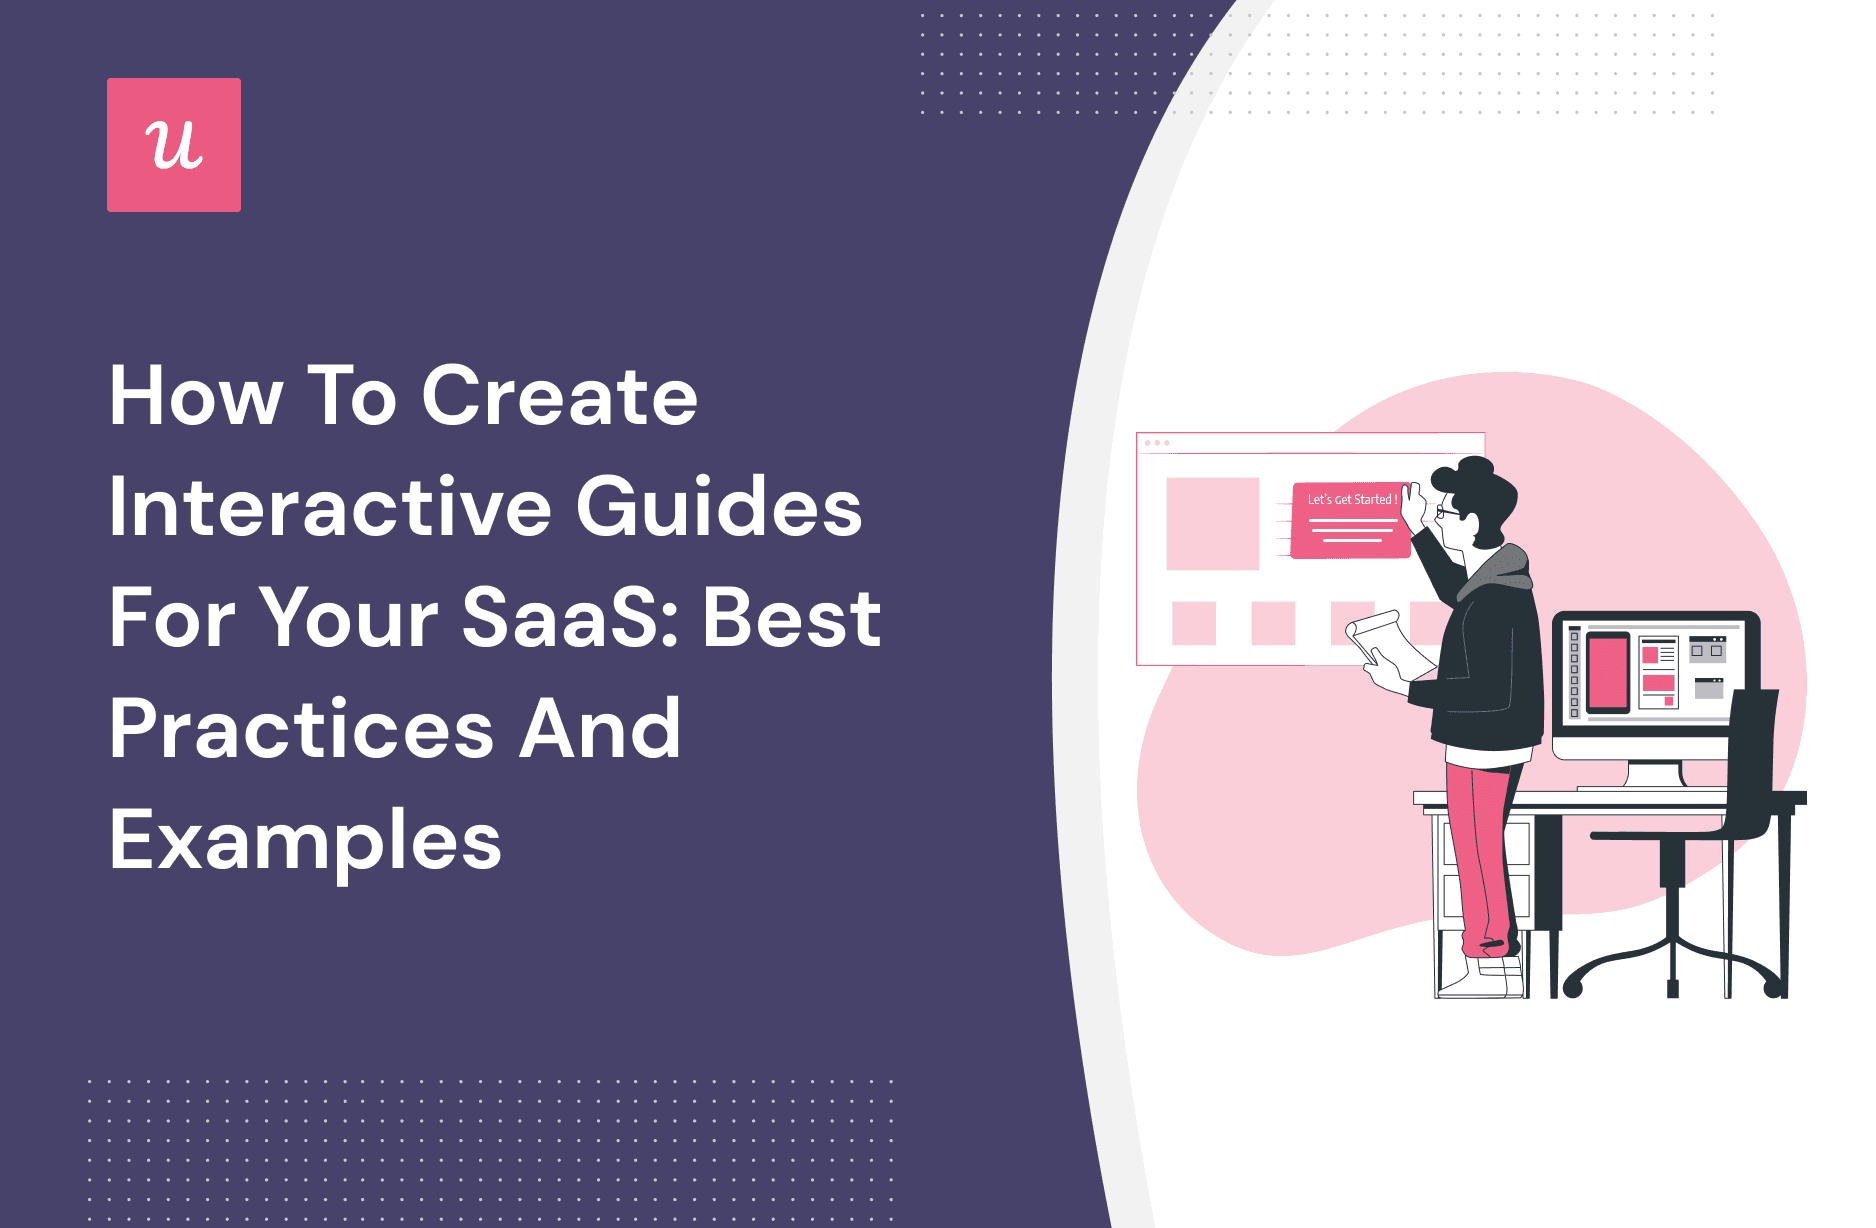 How to Create Interactive Guides for Your SaaS: Best Practices and Examples cover